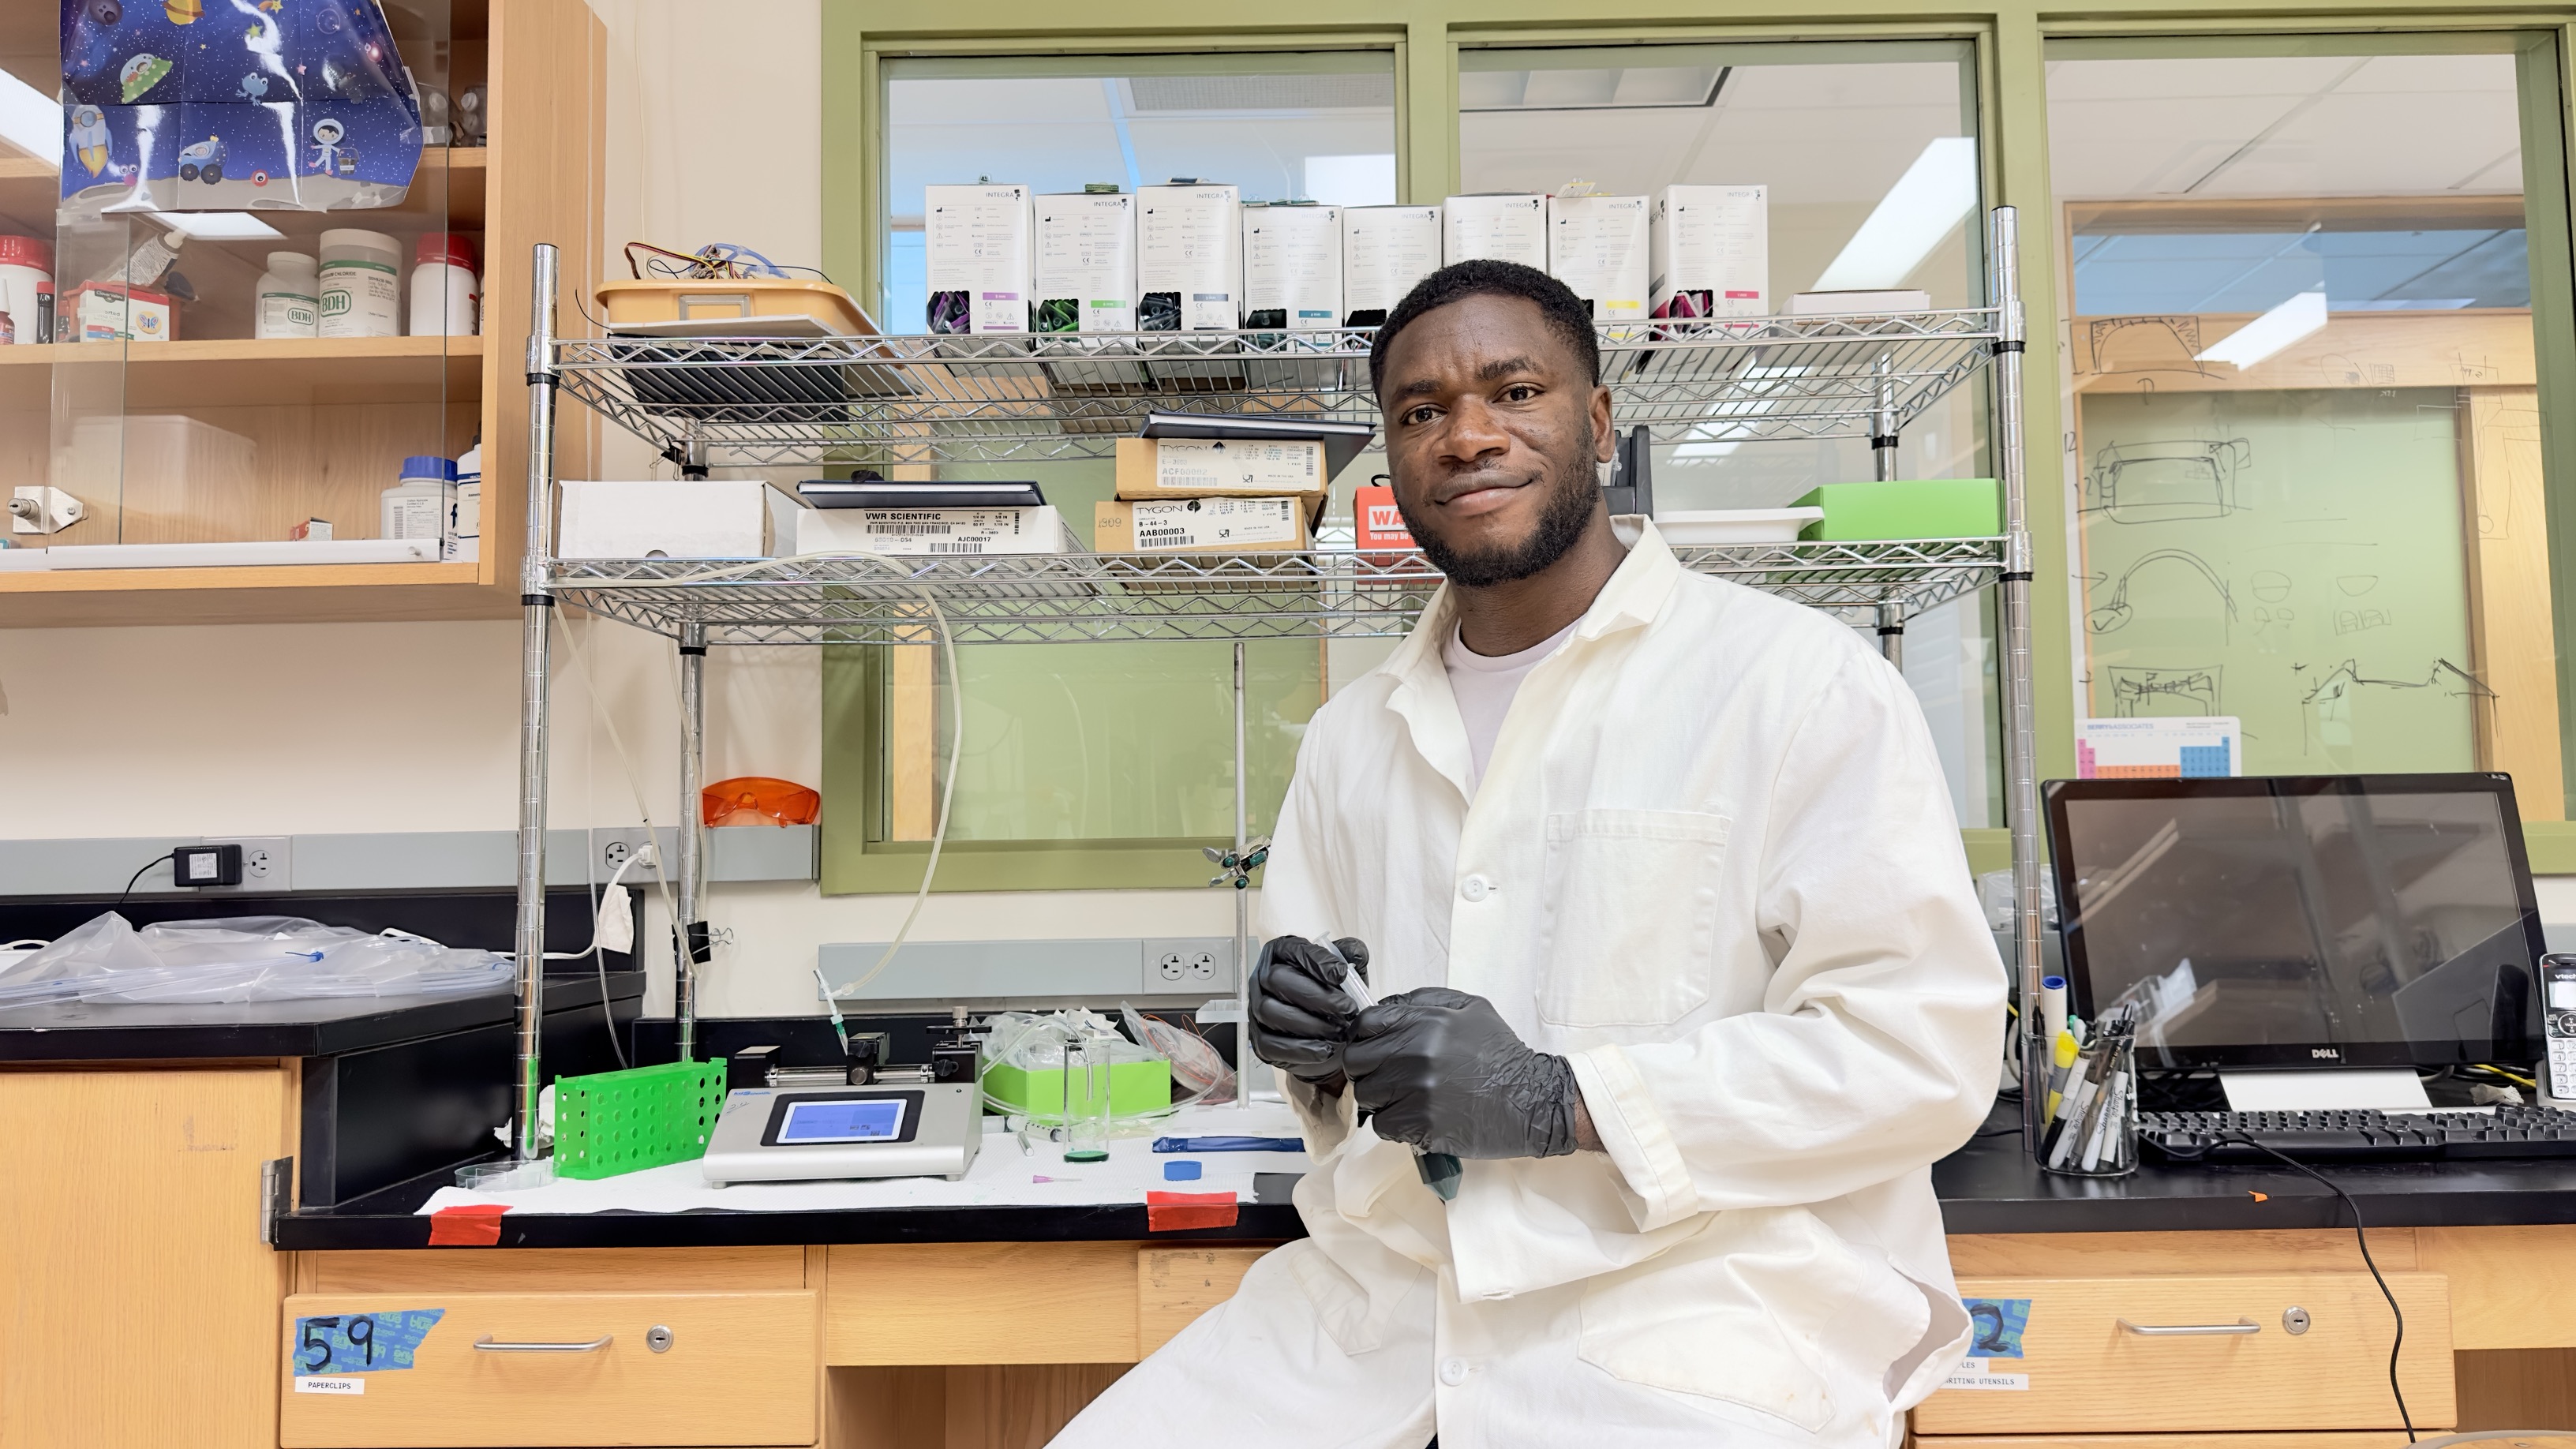 Augustine Atta Debrah, a second-year Chemistry Ph.D. student in Stockton’s Lab, is playing a key role in the research.&nbsp;“This project shows our dedication to uncovering the mysteries of the origins of life and expanding our knowledge about planets far beyond our own,” he says